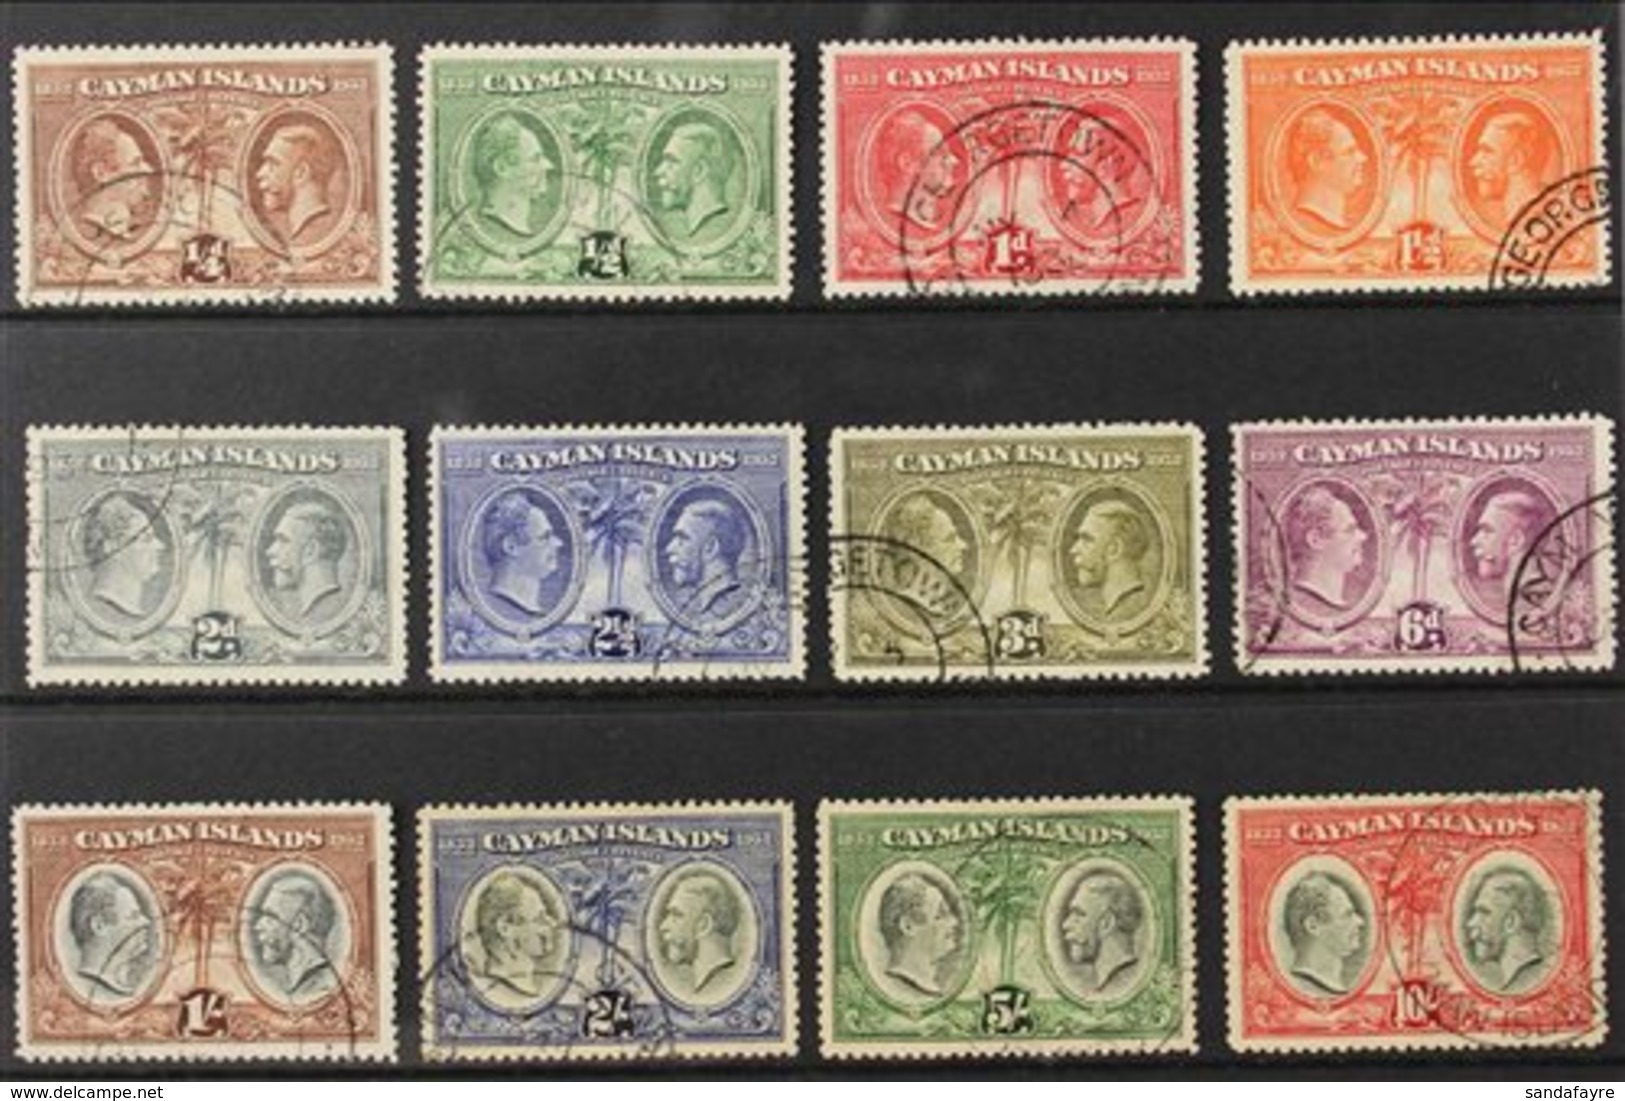 1932 Centenary Of The Assembly Of Justices & Vestry Complete Set, SG 84/95, Fine Used (12 Stamps) For More Images, Pleas - Kaimaninseln